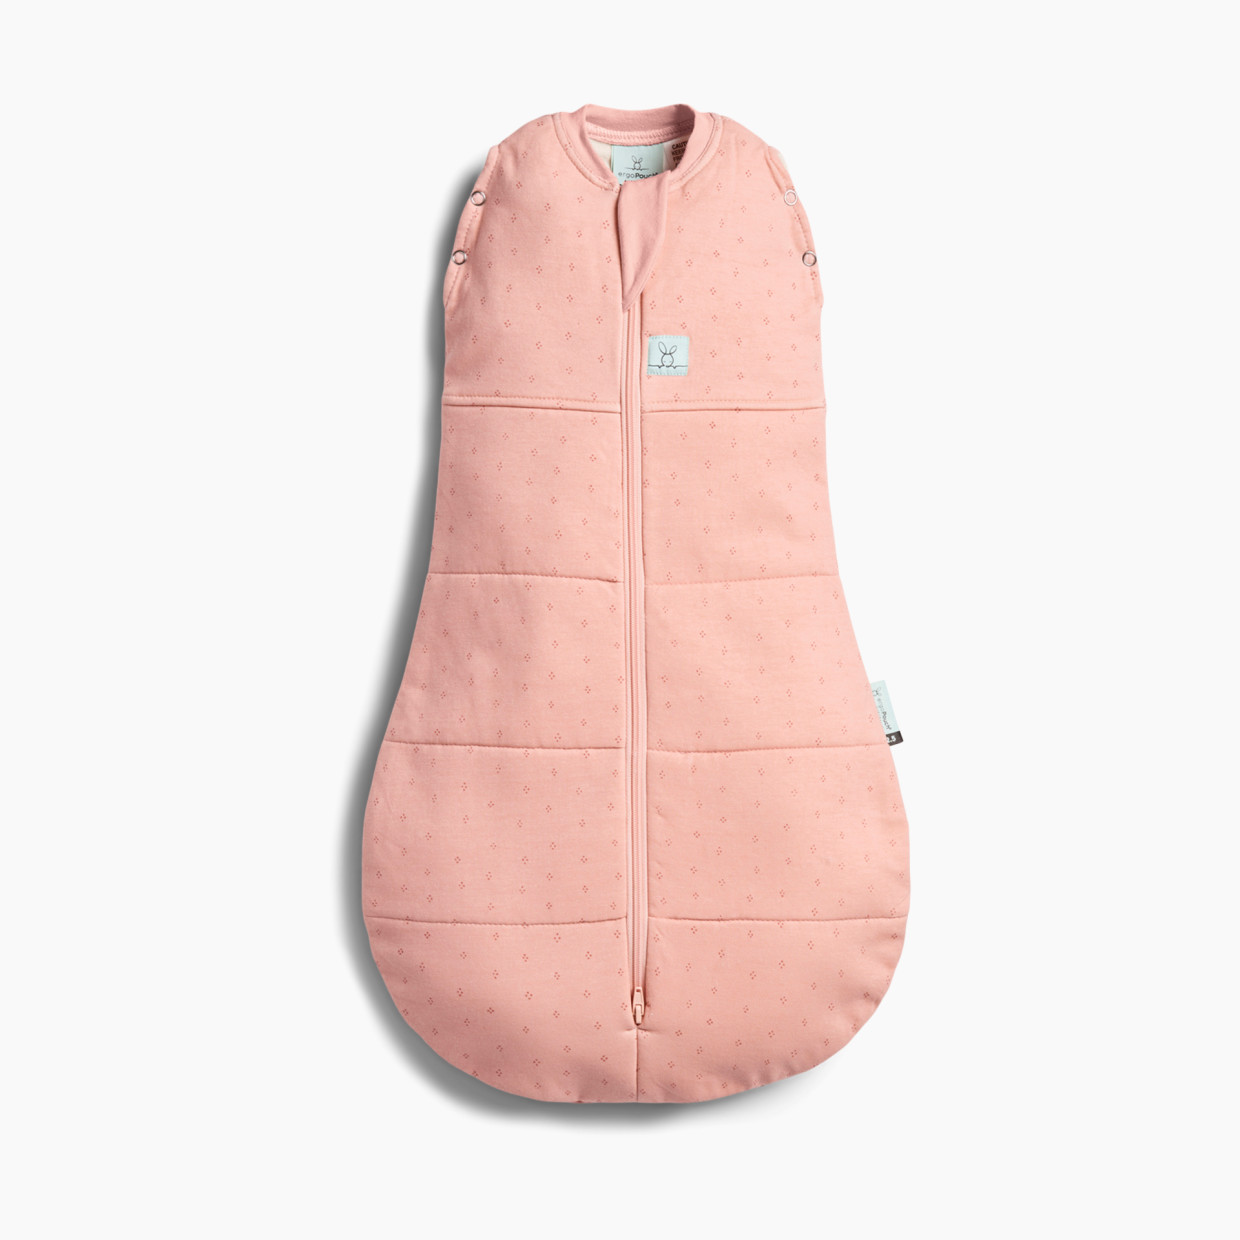 ergoPouch Cocoon Swaddle Bag 2.5 TOG - Berries, 0-3 Months.